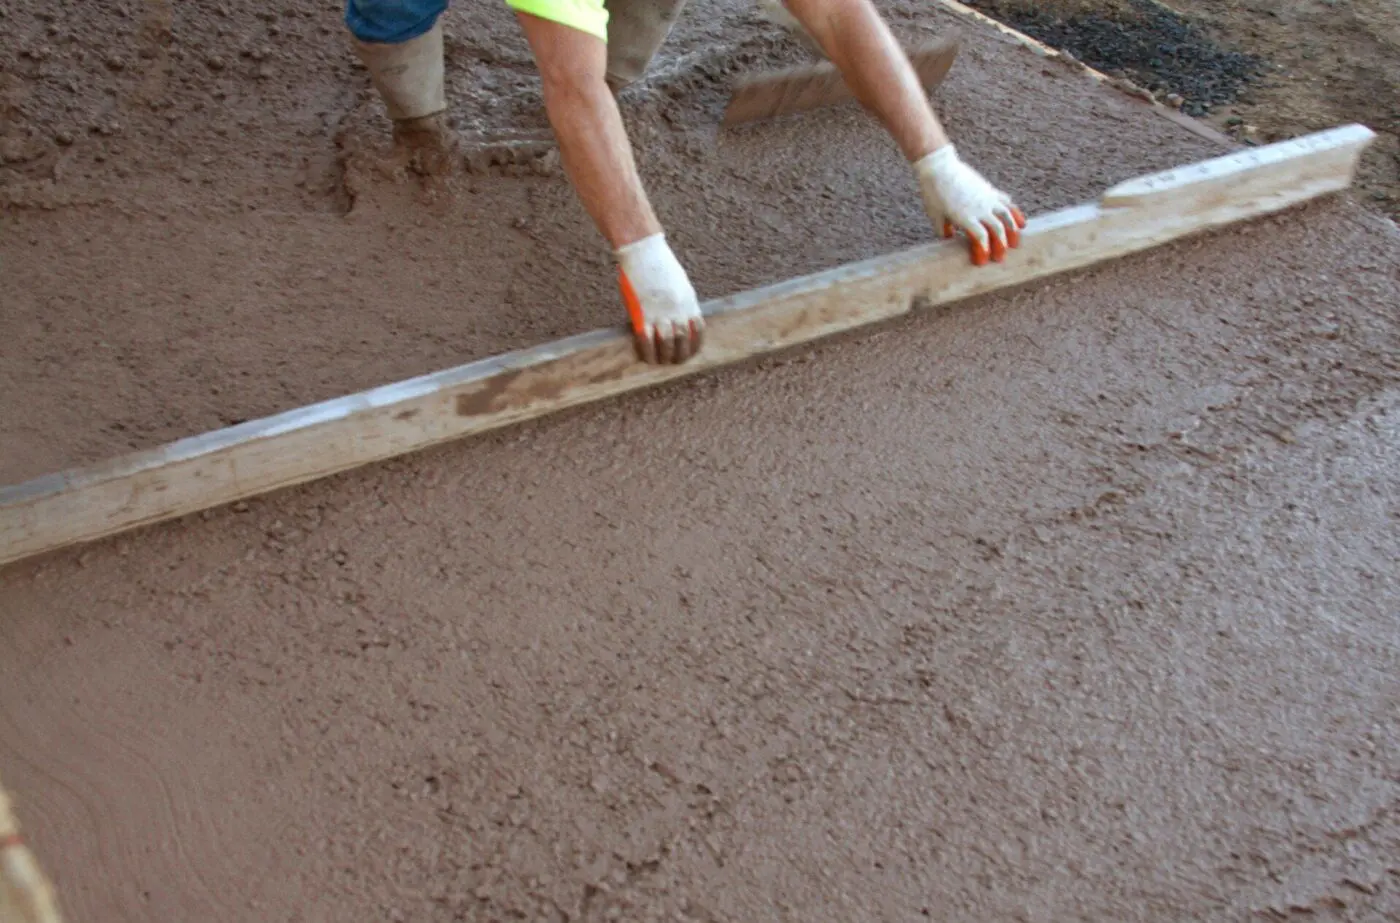 A construction worker in a high-visibility shirt and gloves uses a long wooden plank to level freshly poured decorative concrete on the ground. The worker’s legs and arms are visible, with the concrete surface appearing smooth and wet.